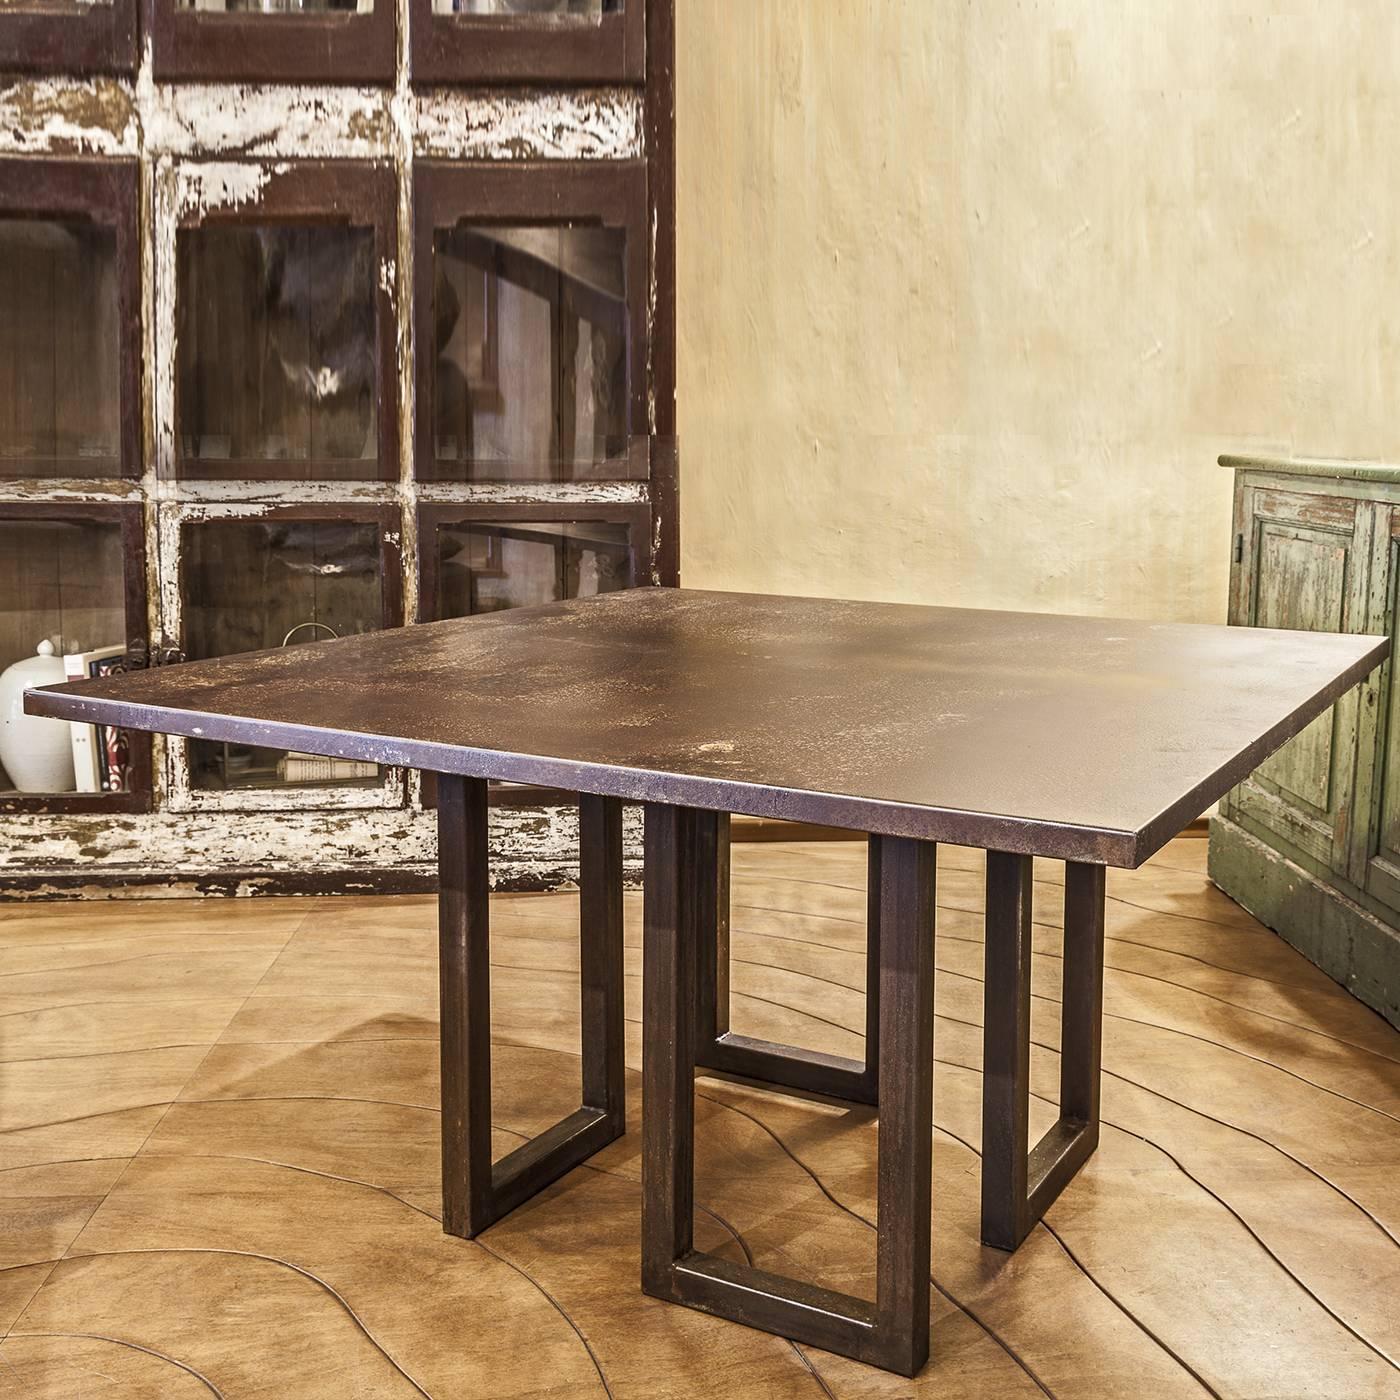 This striking table features a structure made of four rectangles in thick oxidized iron that support a top in multi-ply wood that was given a cover in oxidized iron to match the base, and features also the same thickness. Modern in the choice of